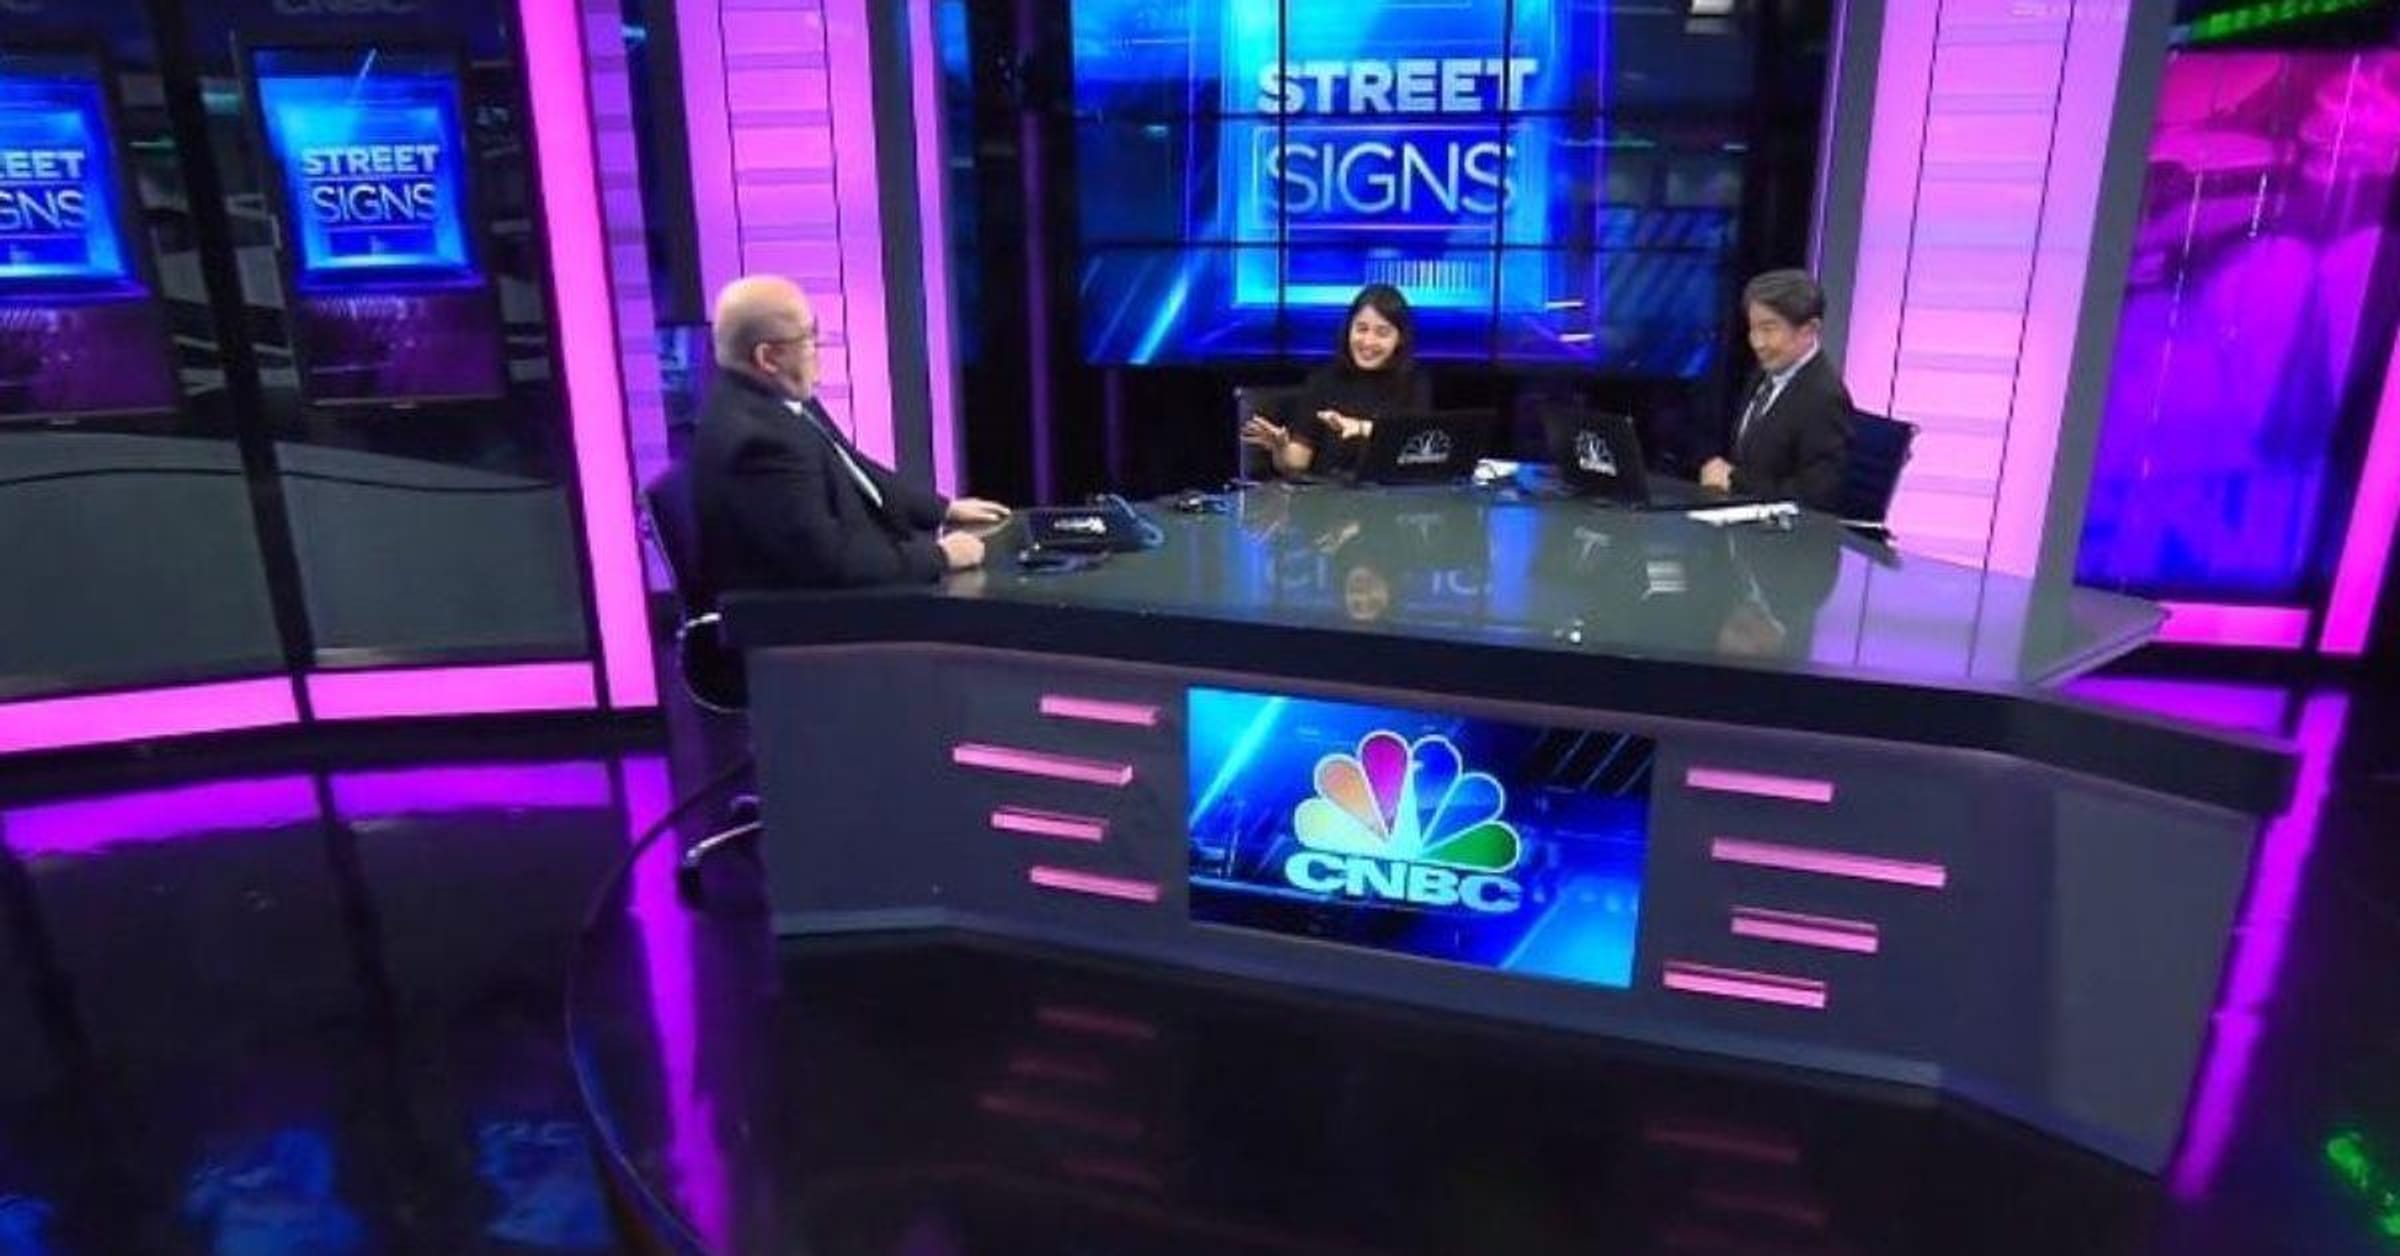 CNBC's 'Last Call,' hosted by Brian Sullivan, premieres tonight